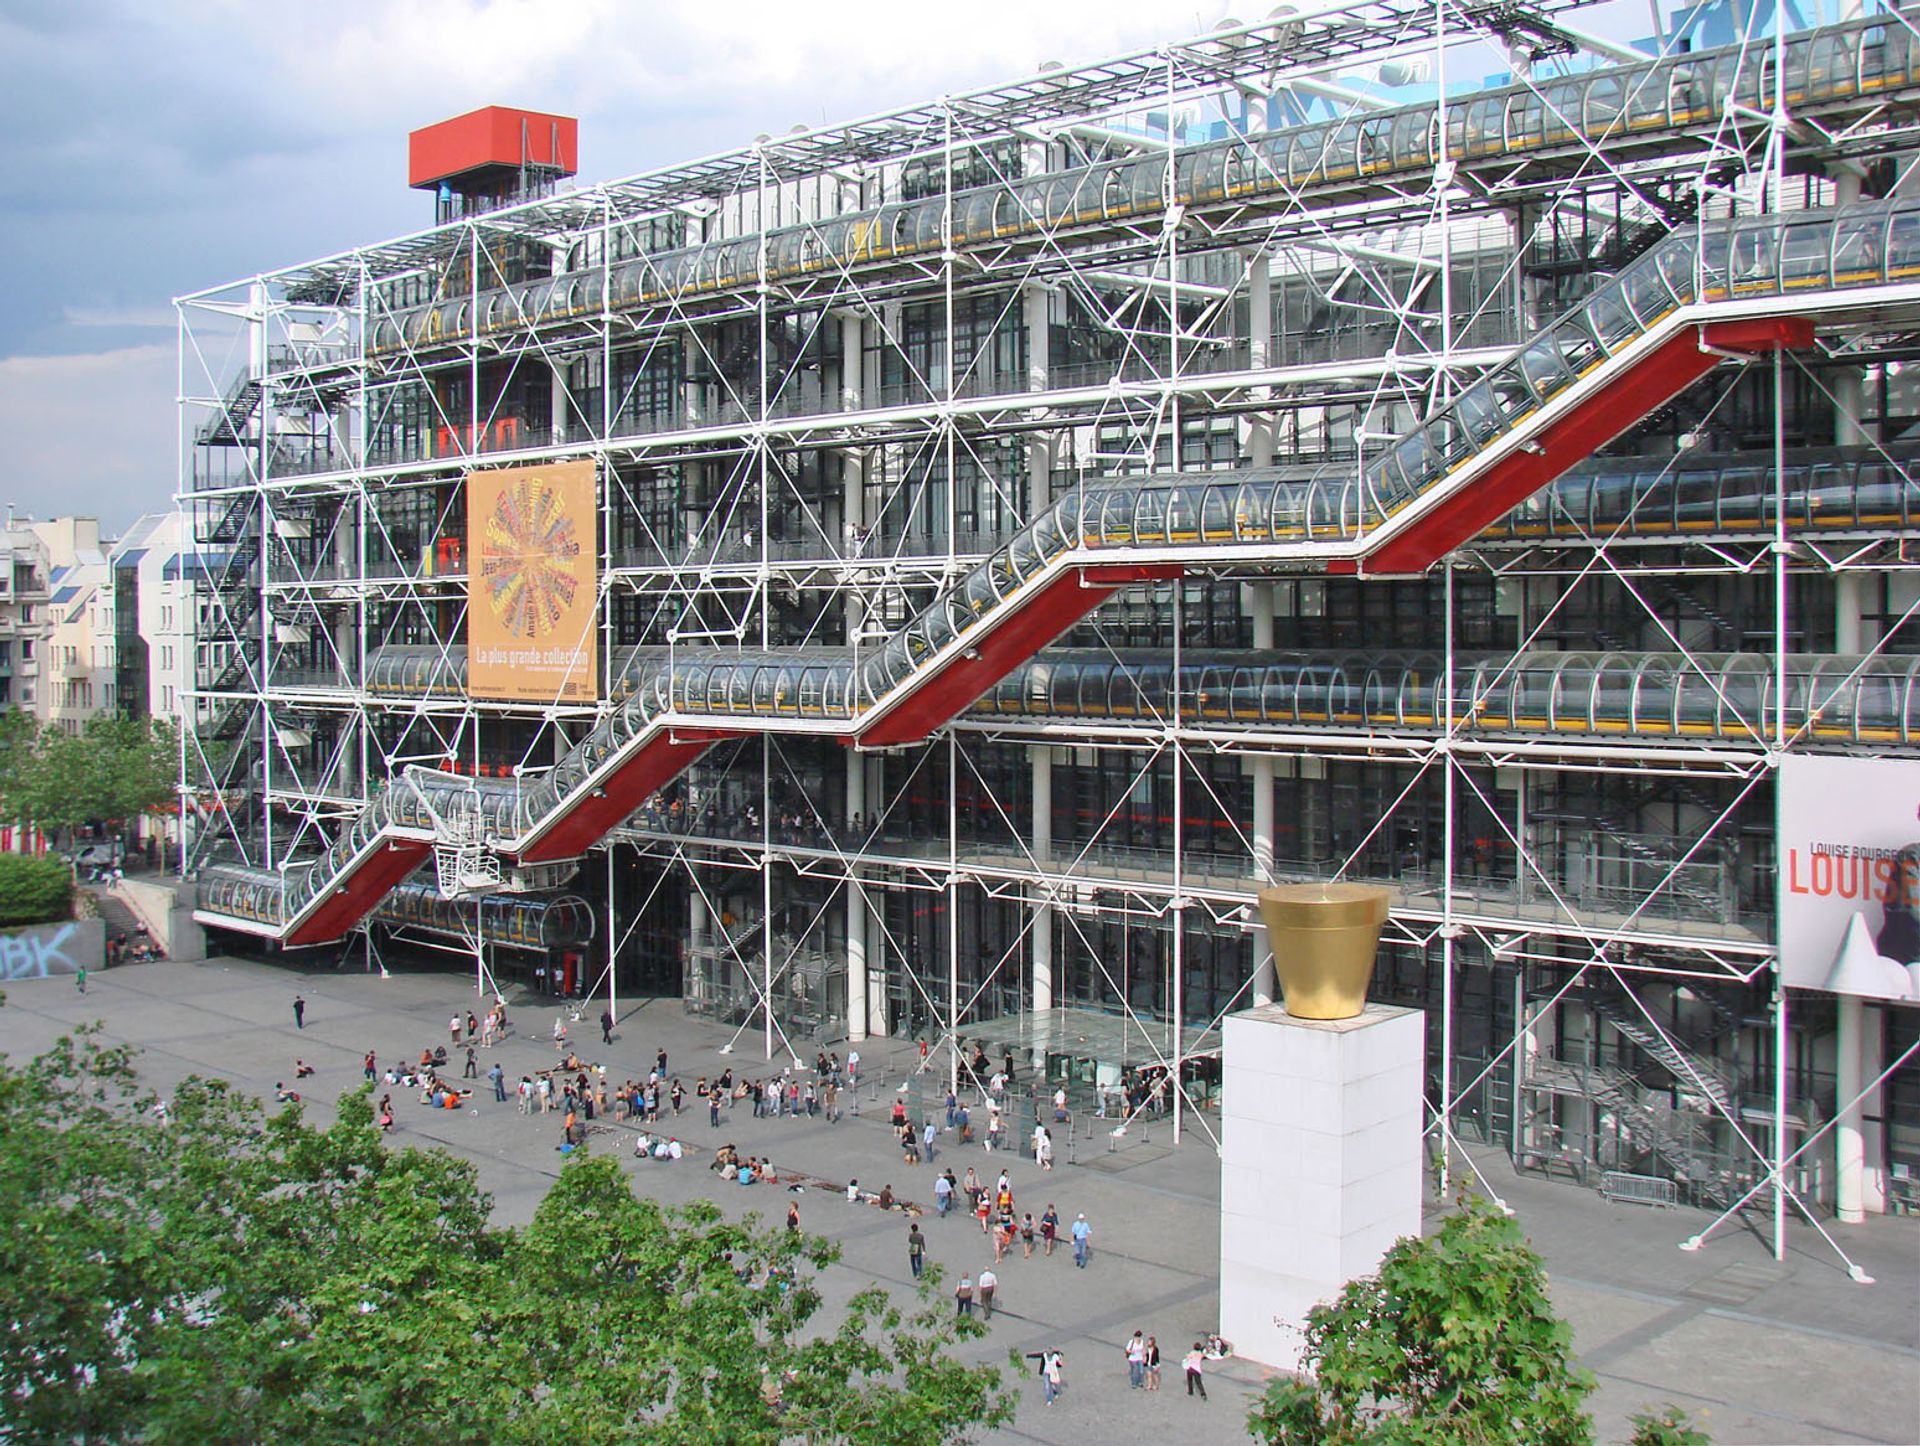 The Centre Pompidou in Paris already has satellite venues in Metz, north-east France, and in Shanghai, which opened in November last year Photo: Jean-Pierre Dalbéra